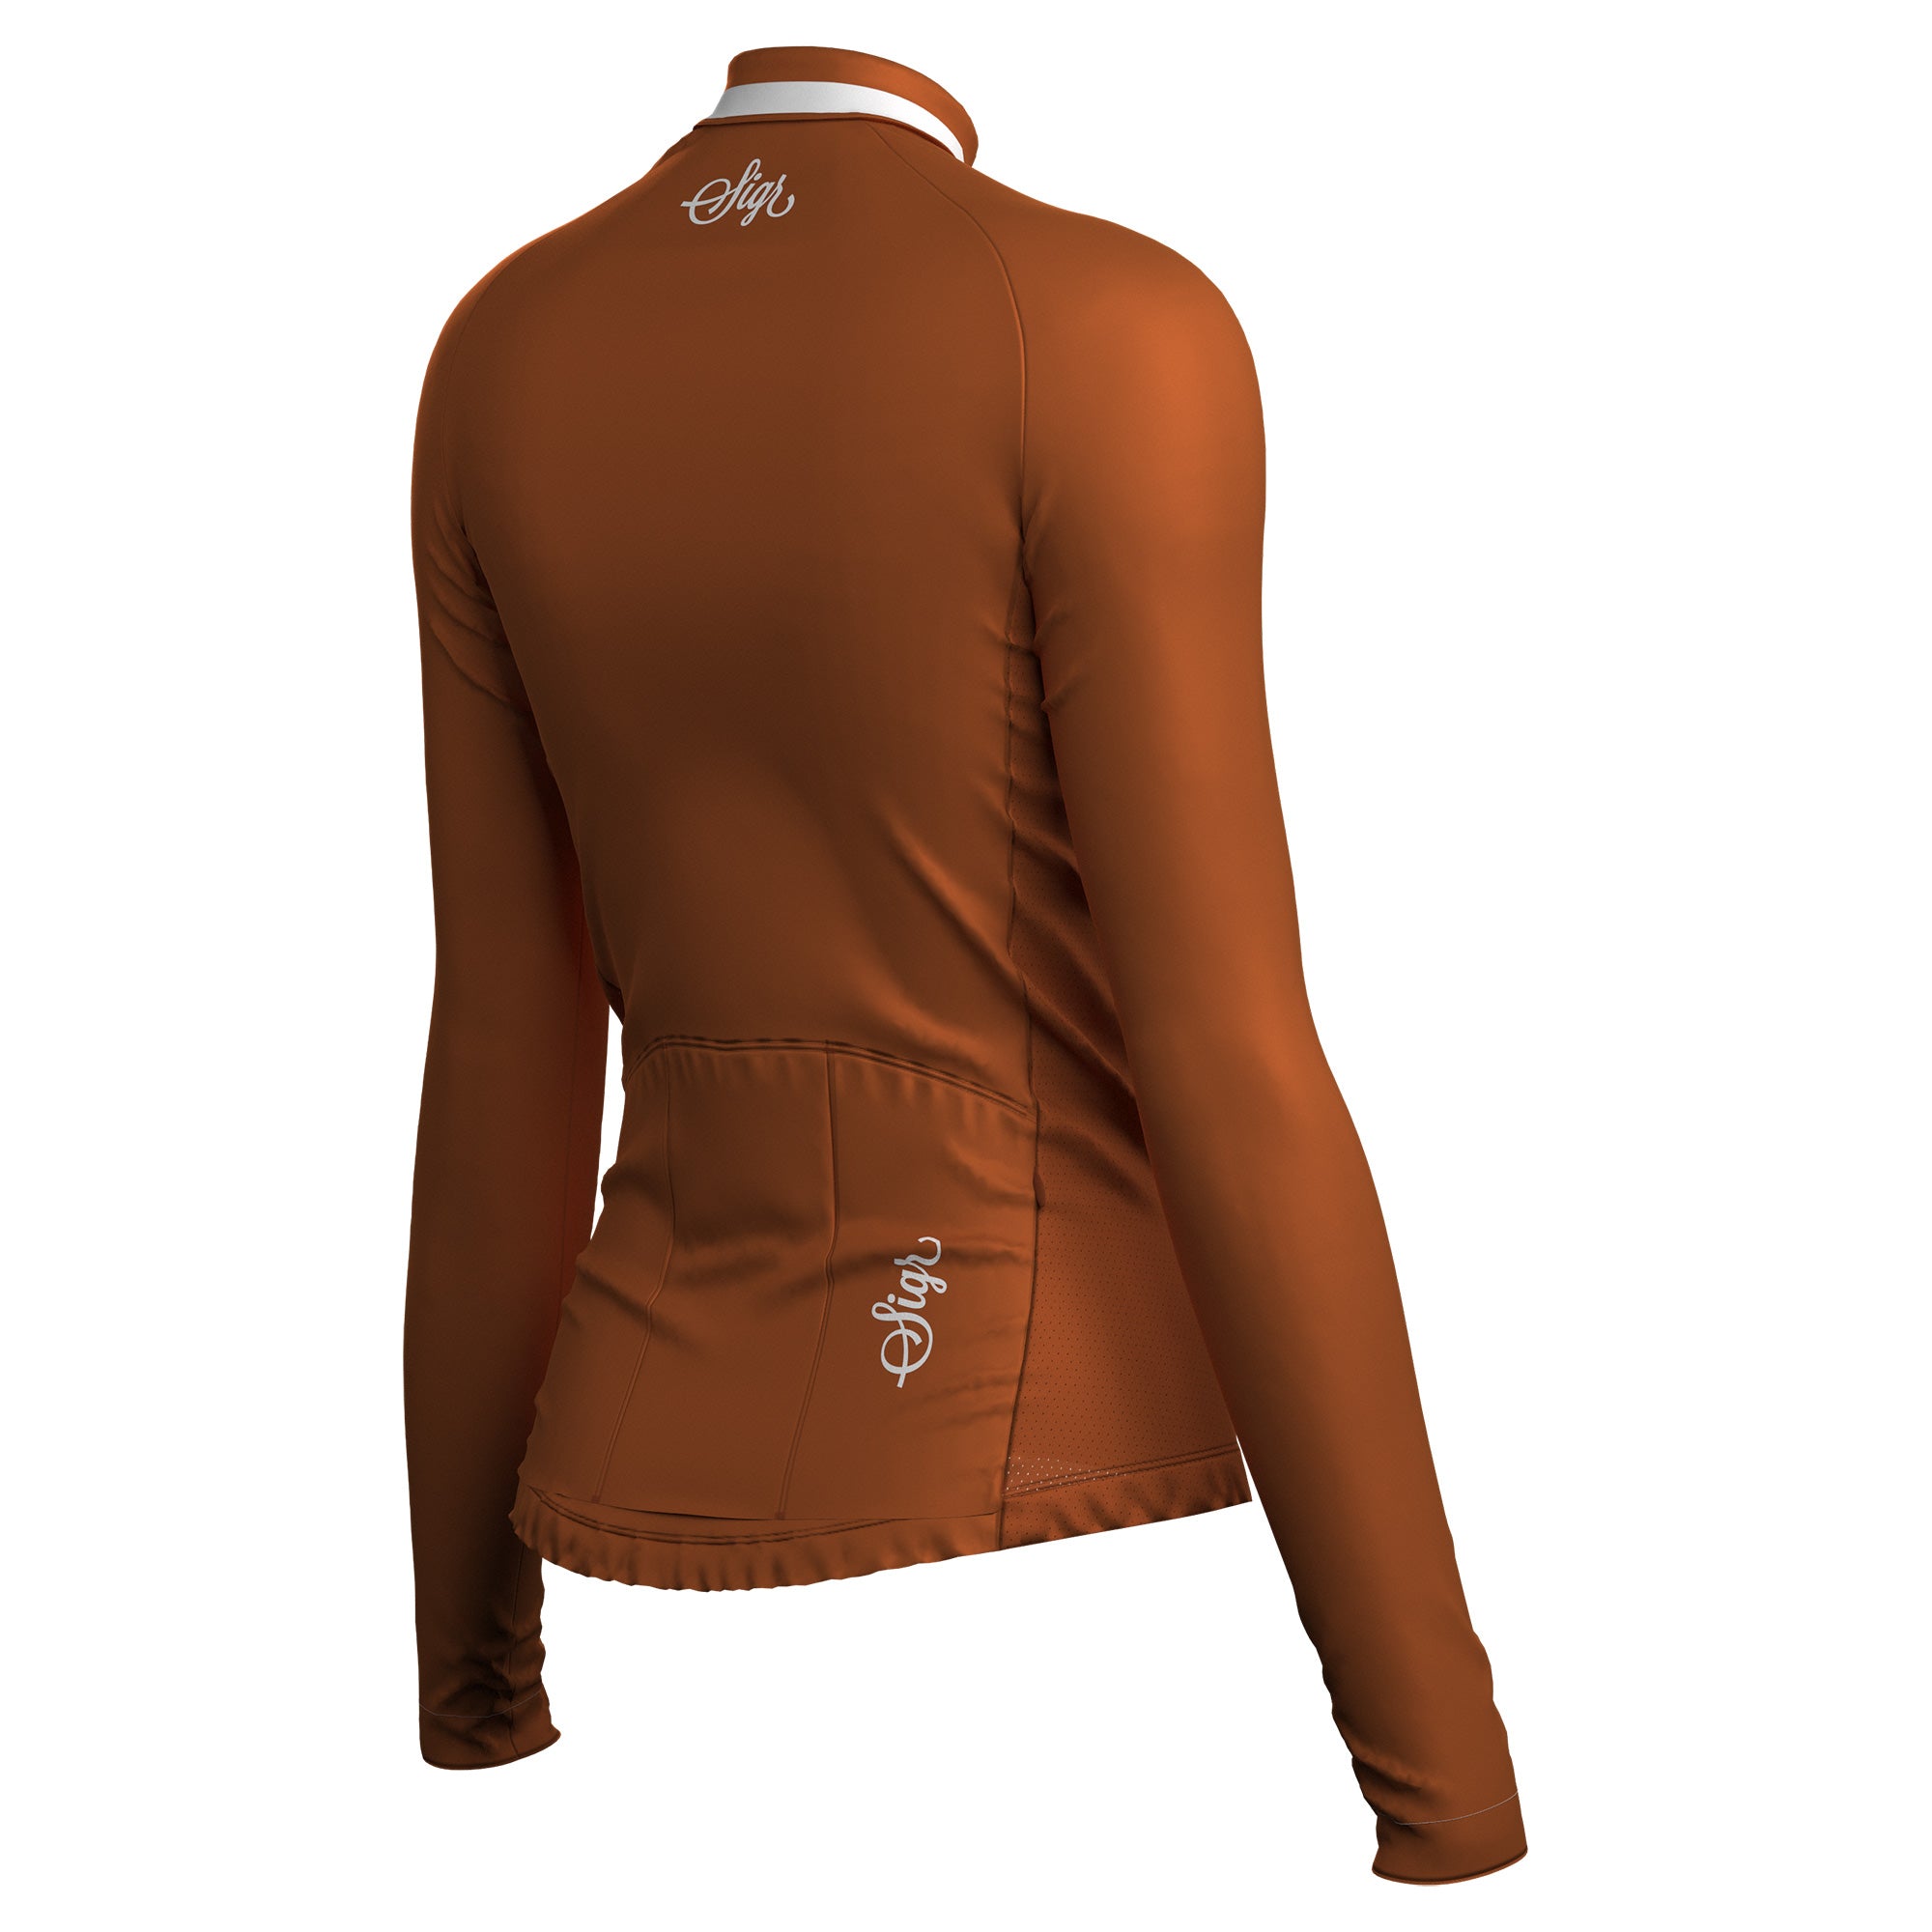 Wildflower - Brown Long Sleeved Jersey for Women